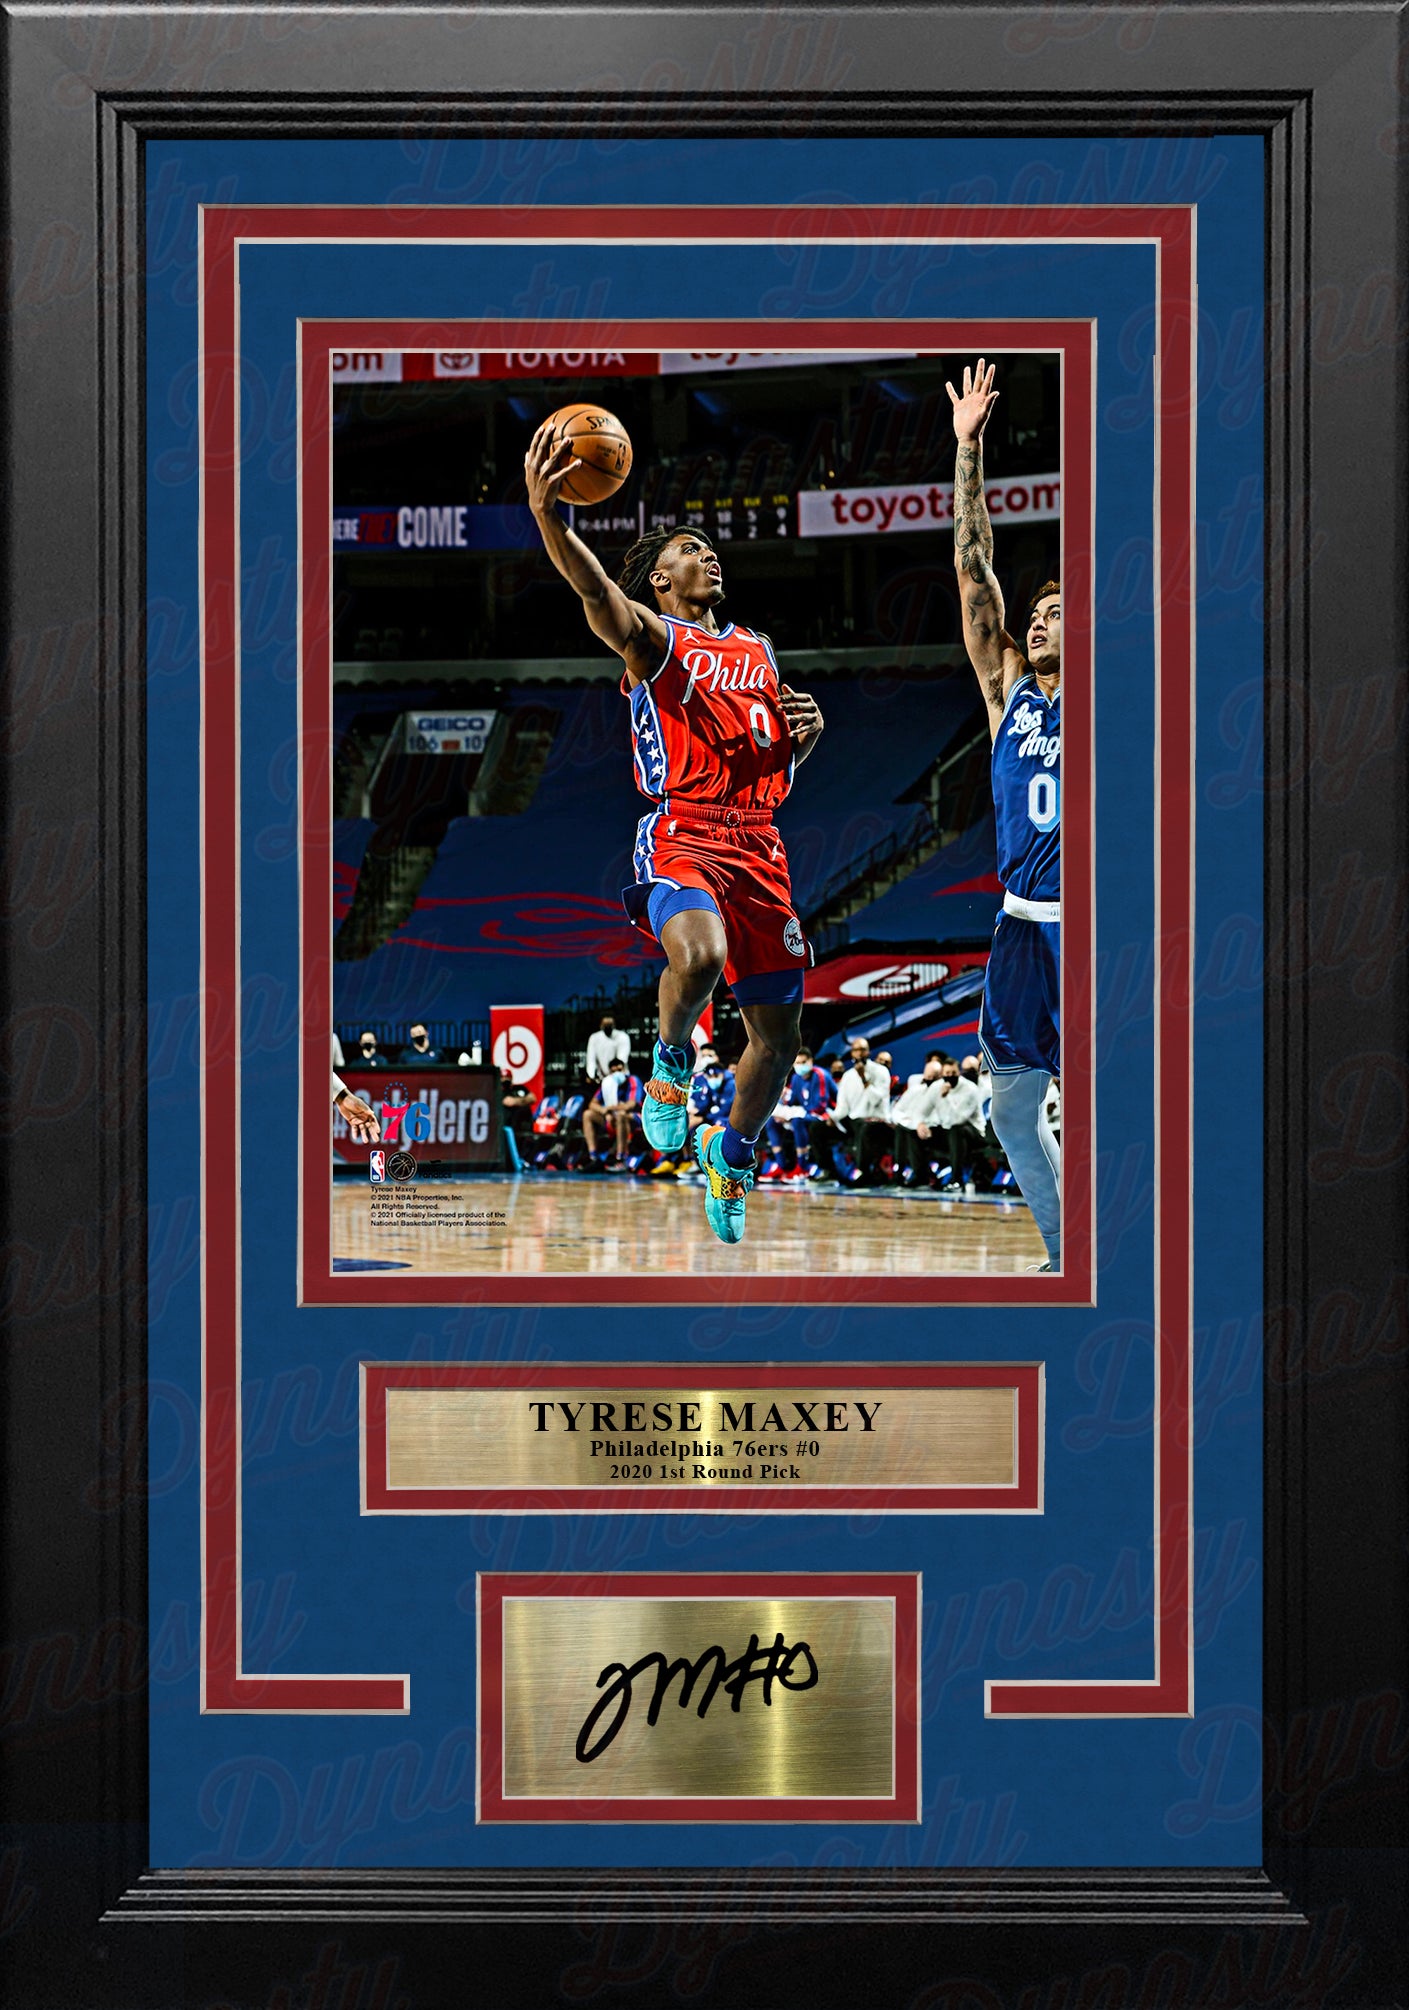 Tyrese Maxey in Action Philadelphia 76ers 8" x 10" Framed Basketball Photo with Engraved Autograph - Dynasty Sports & Framing 